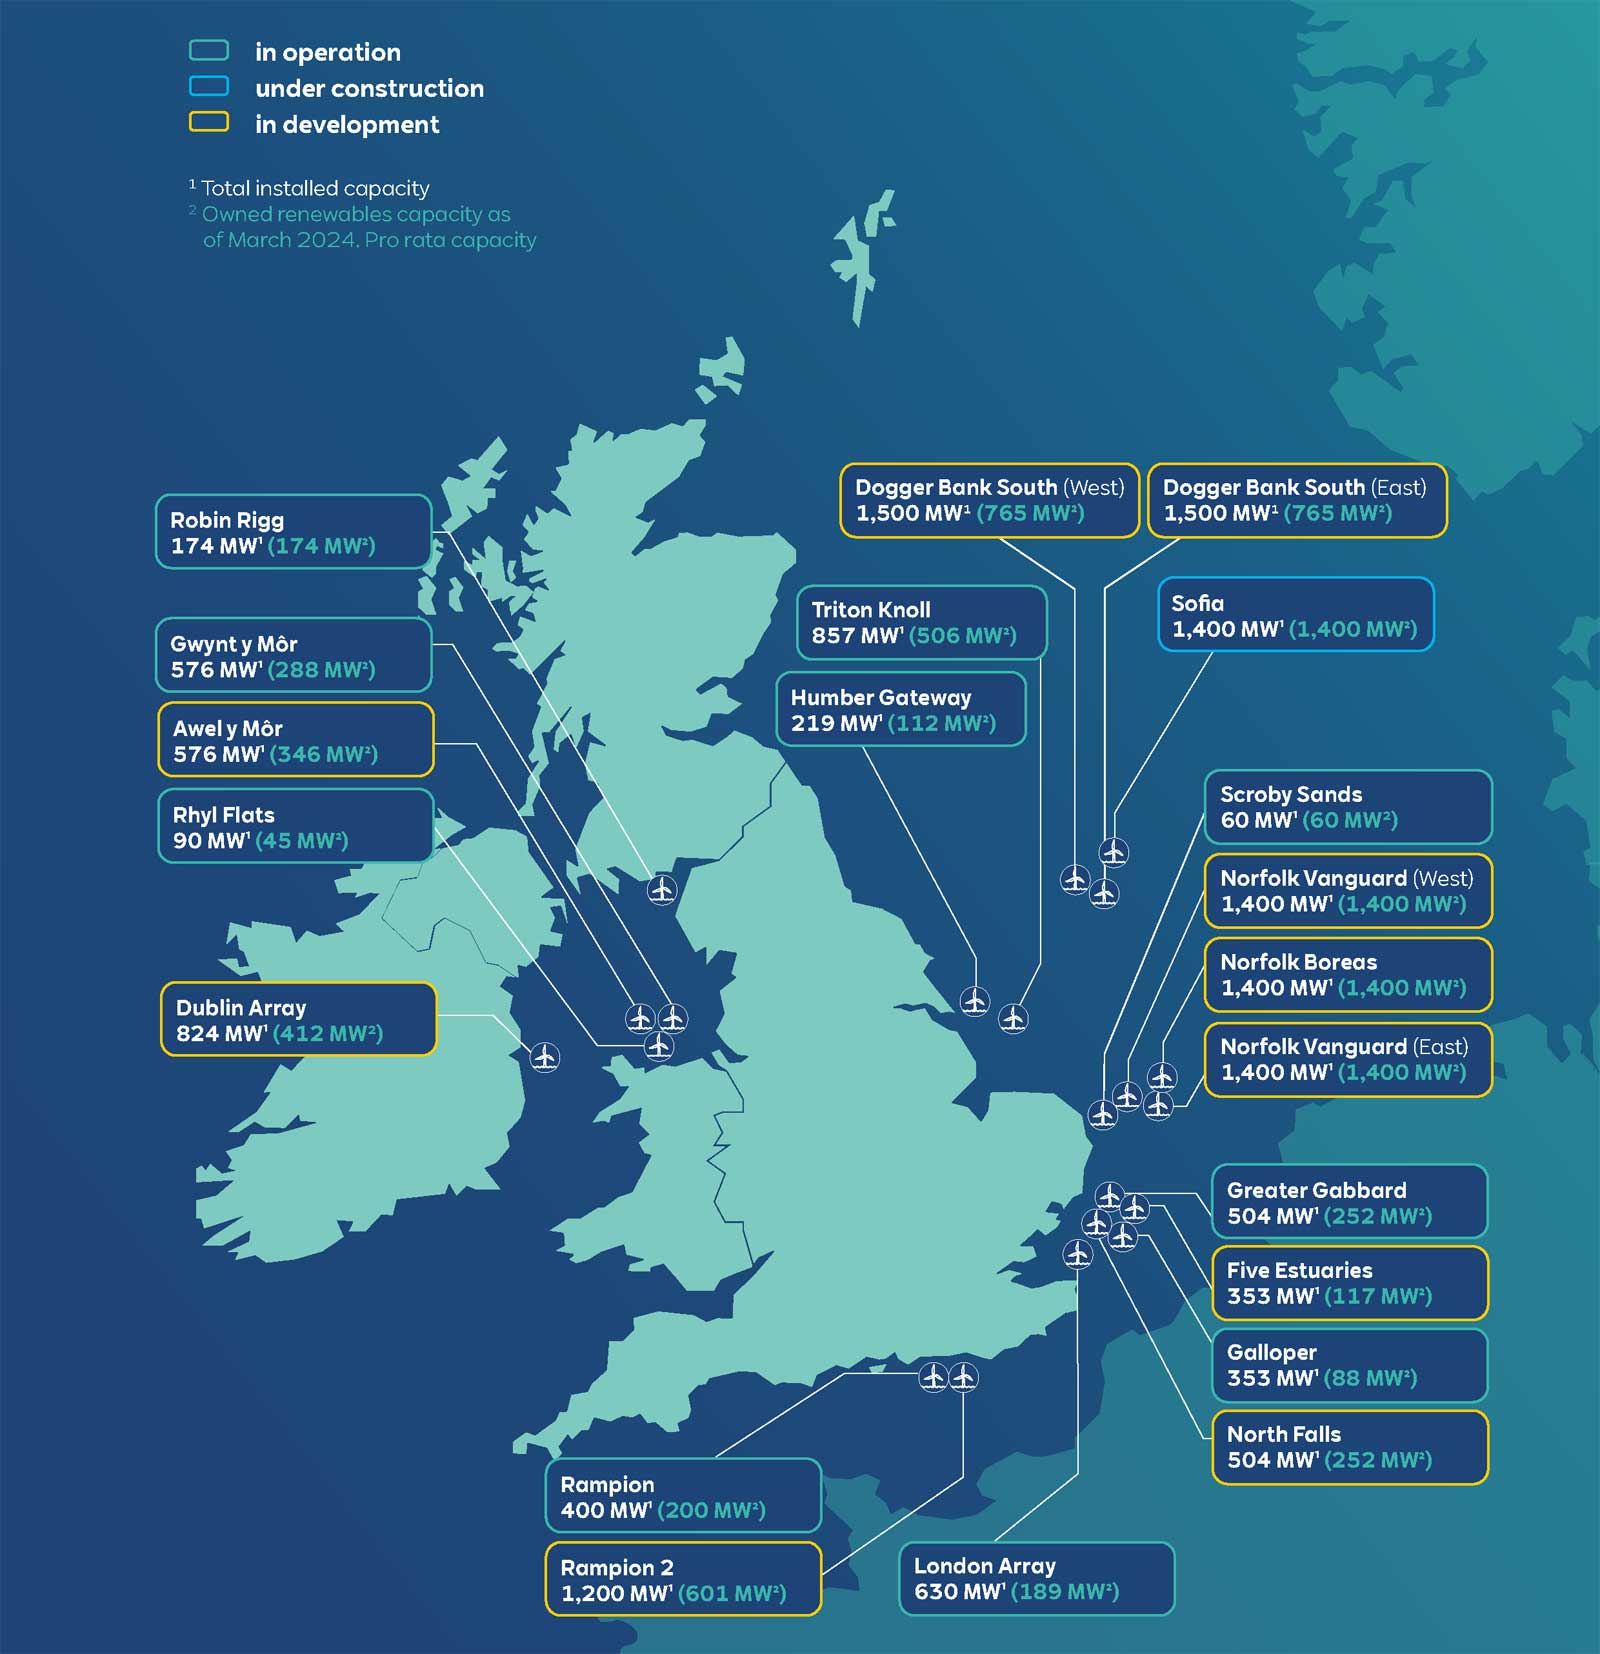 RWE offshore assets in the UK